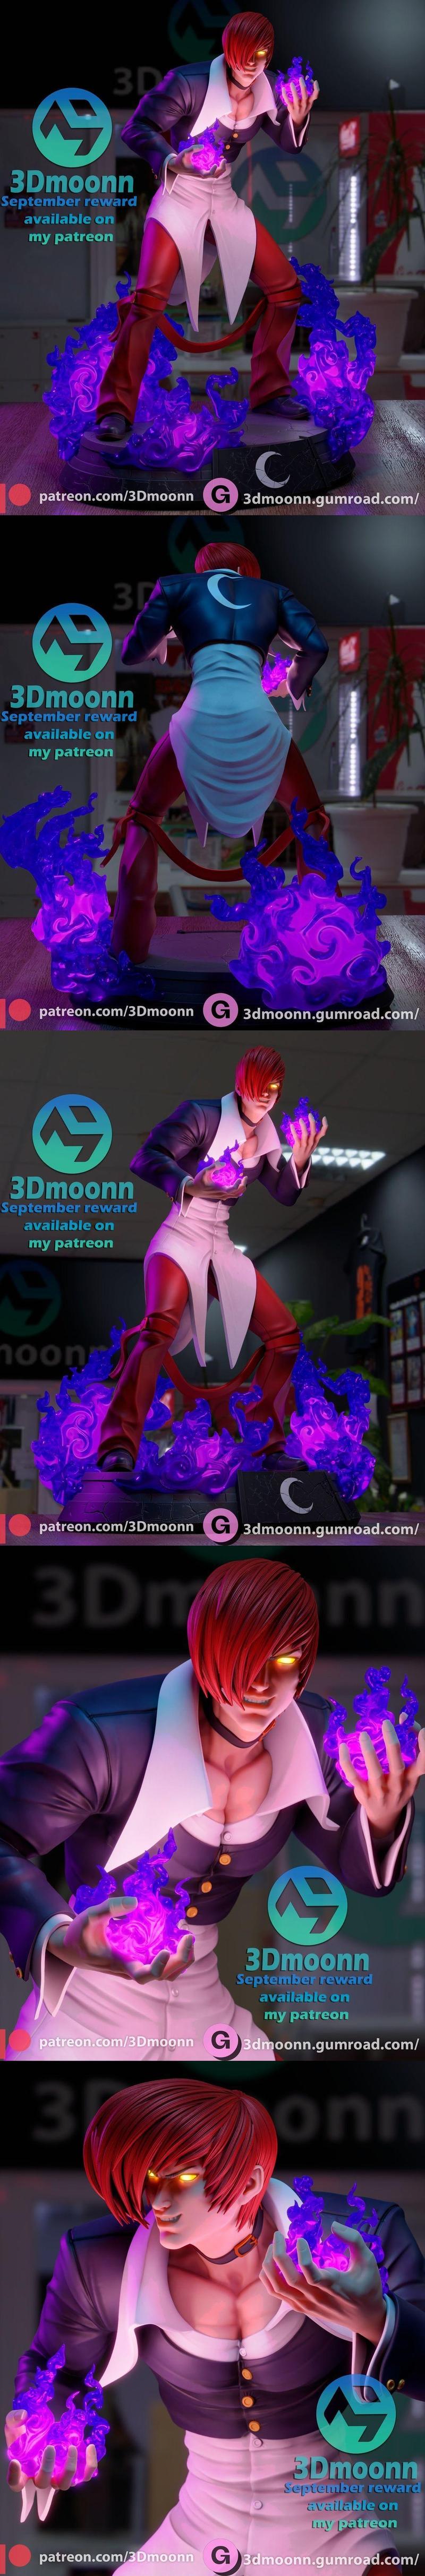 3Dmoonn – Iori Yagami - The King Of Fighters  